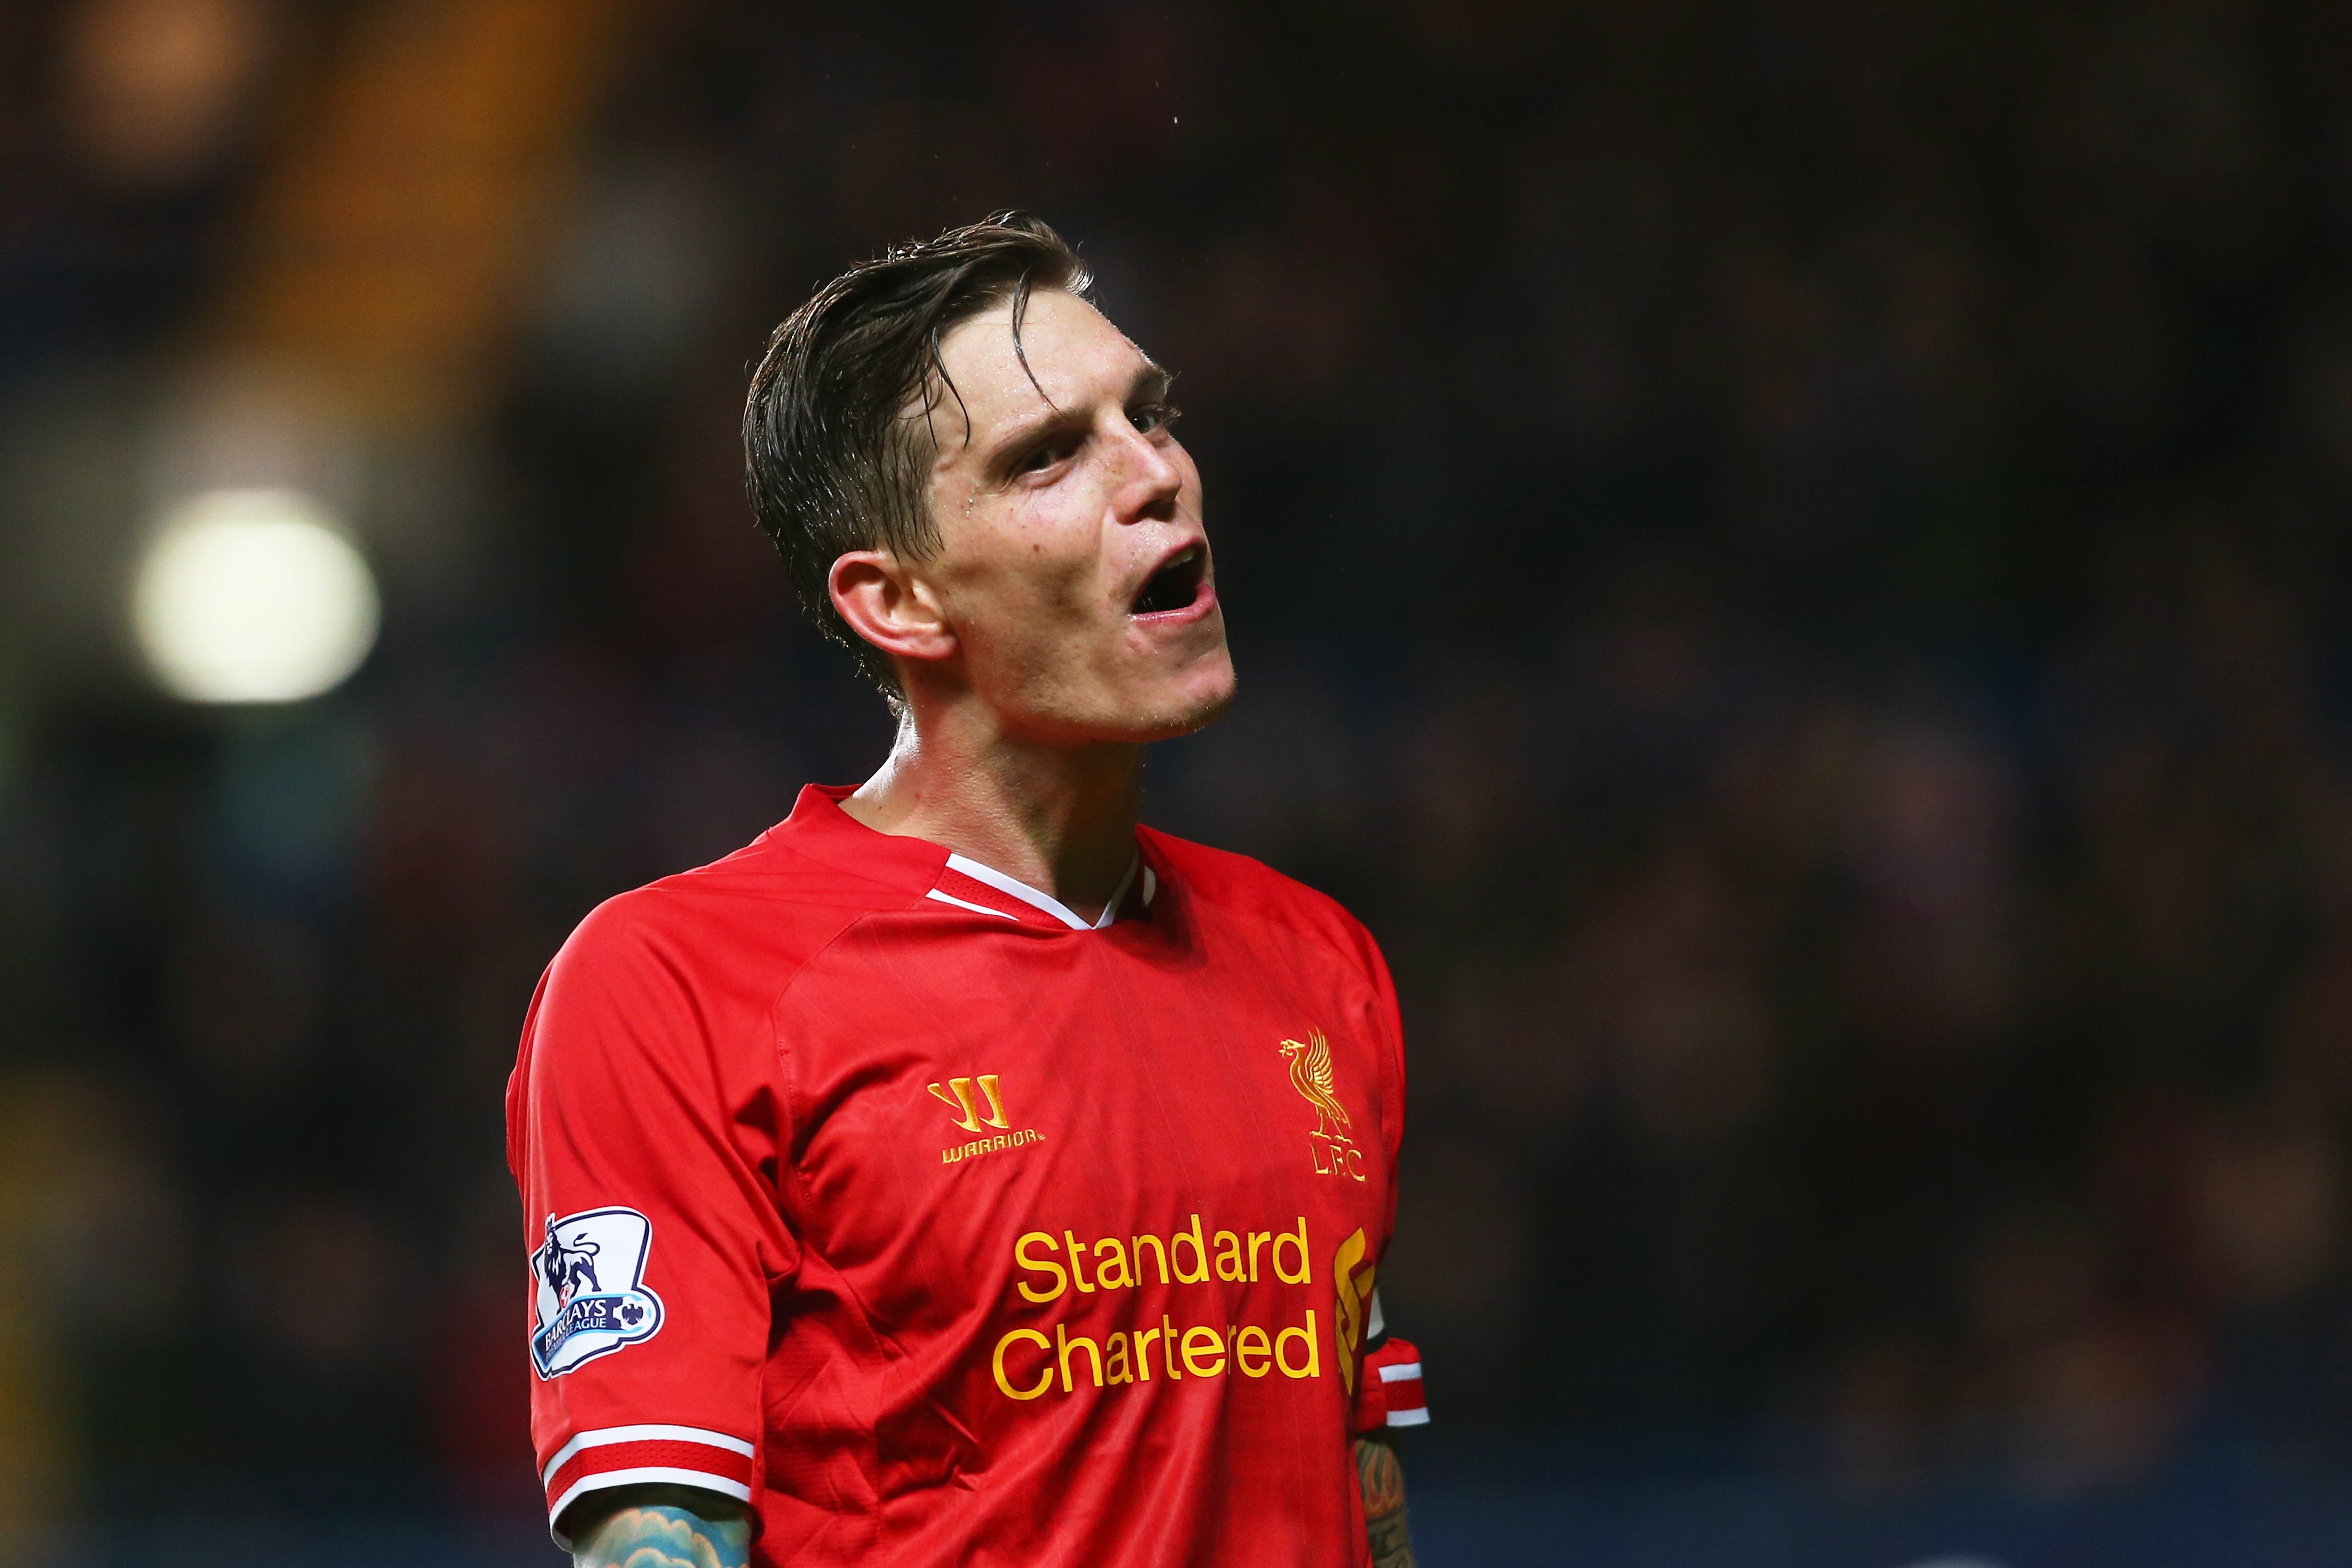 Agger in action for Liverpool in 2013